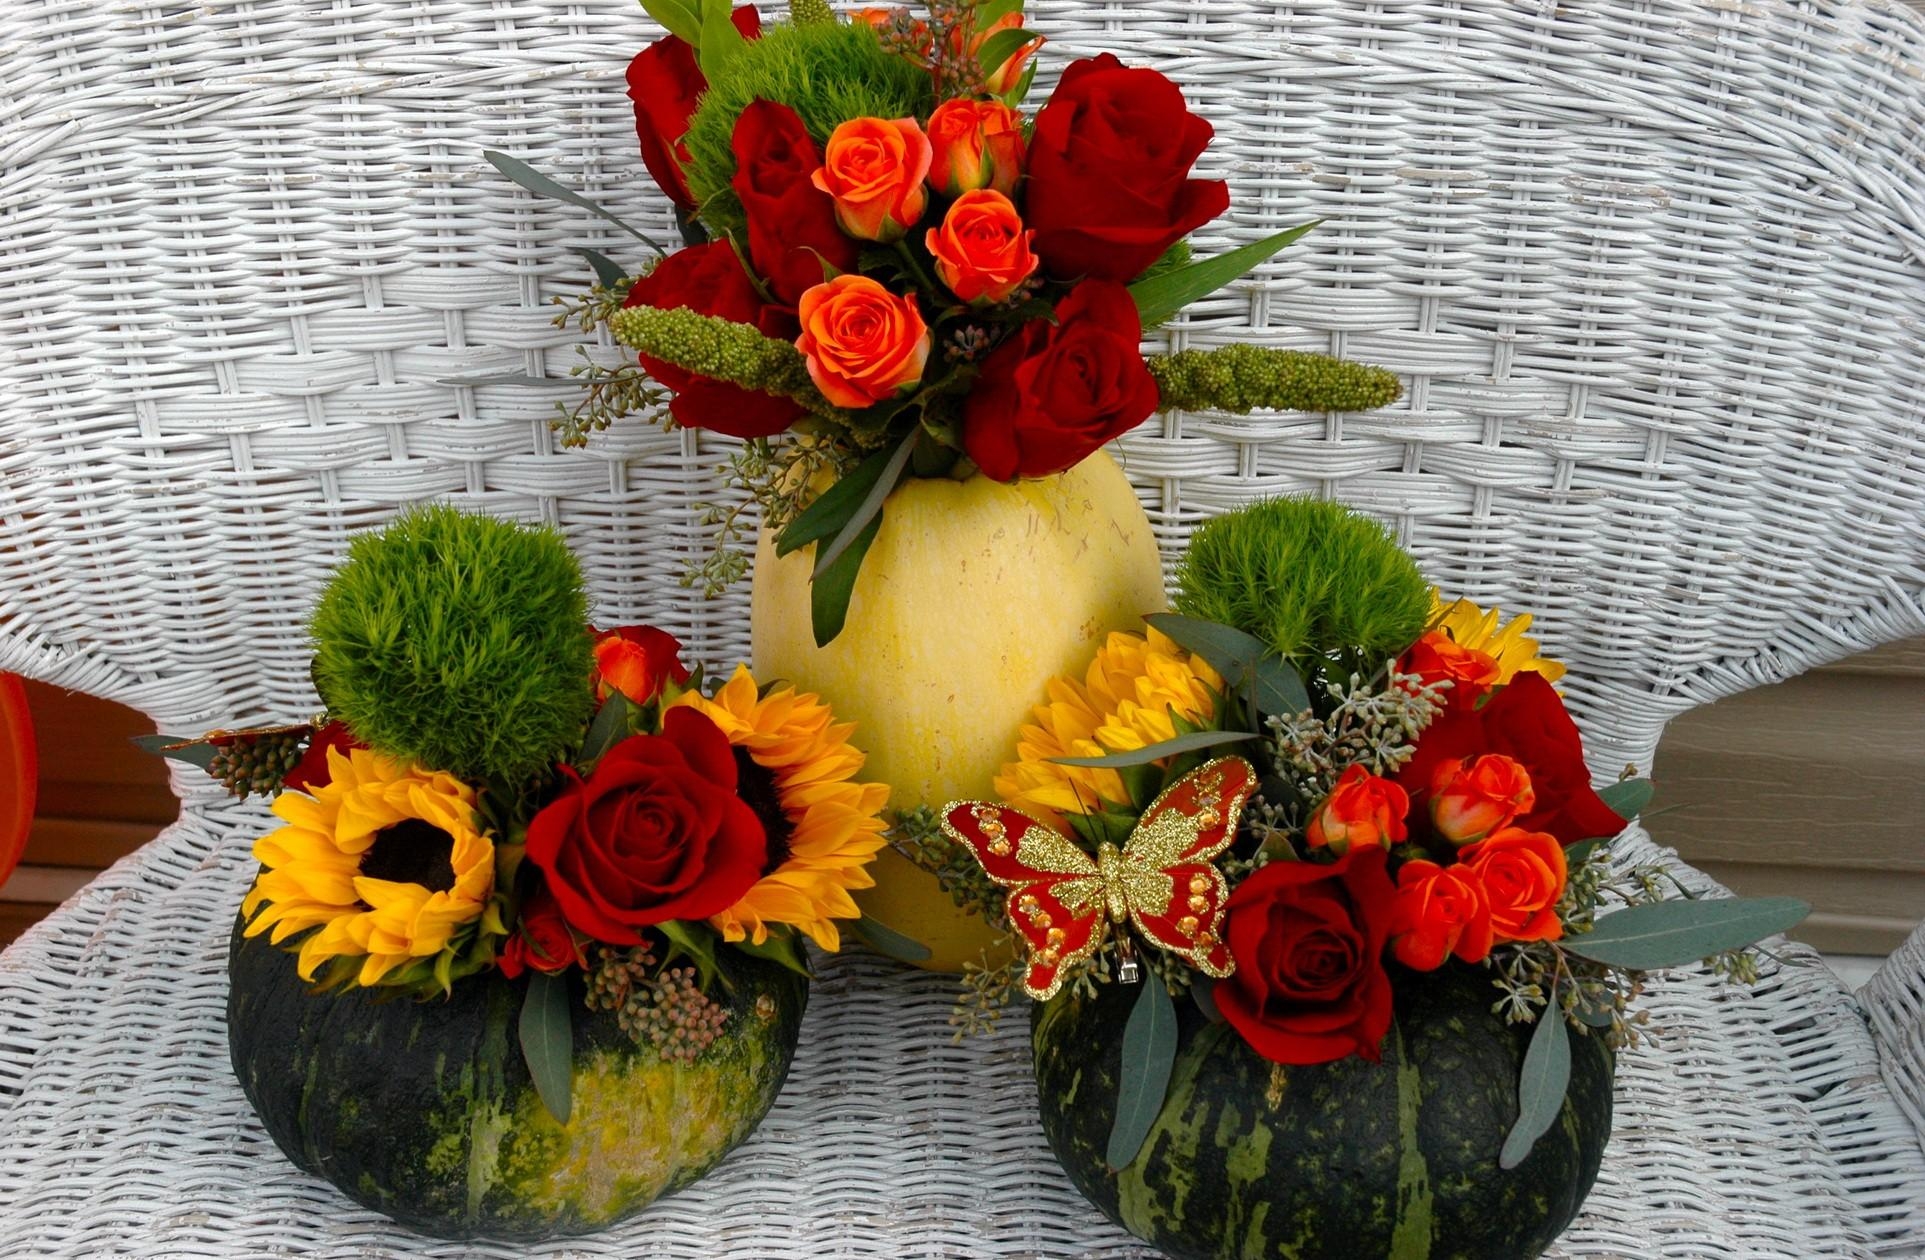 bouquets, roses, pumpkin, composition HD Wallpaper for Phone